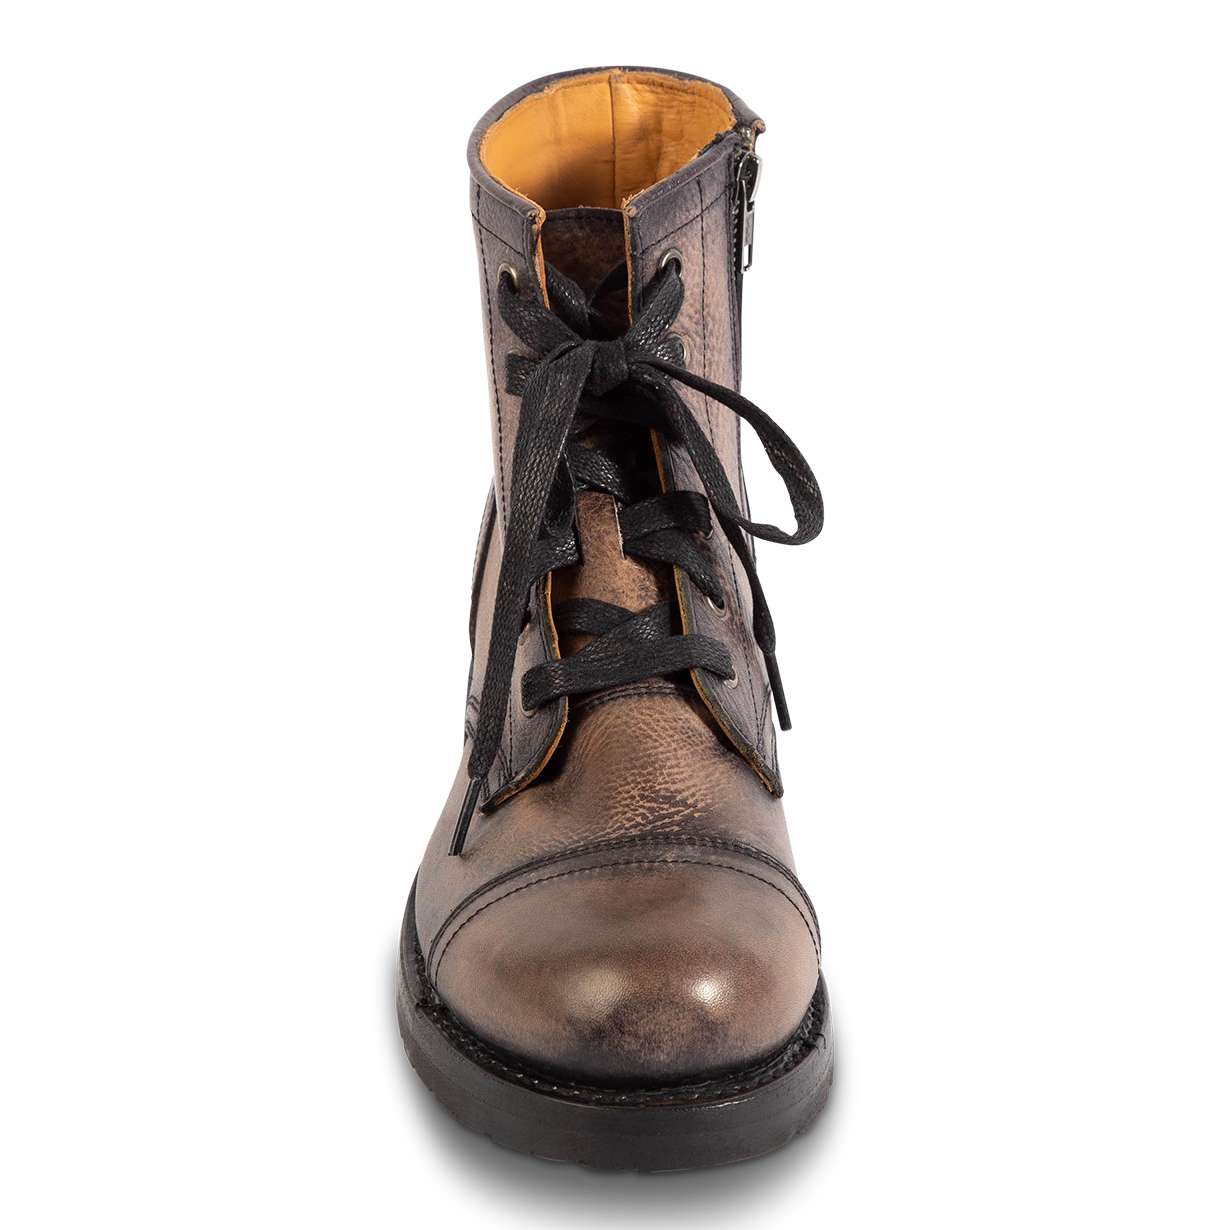 Front view showing woven leather lacing and cap toe construction on FREEBIRD mens Eli black leather boot